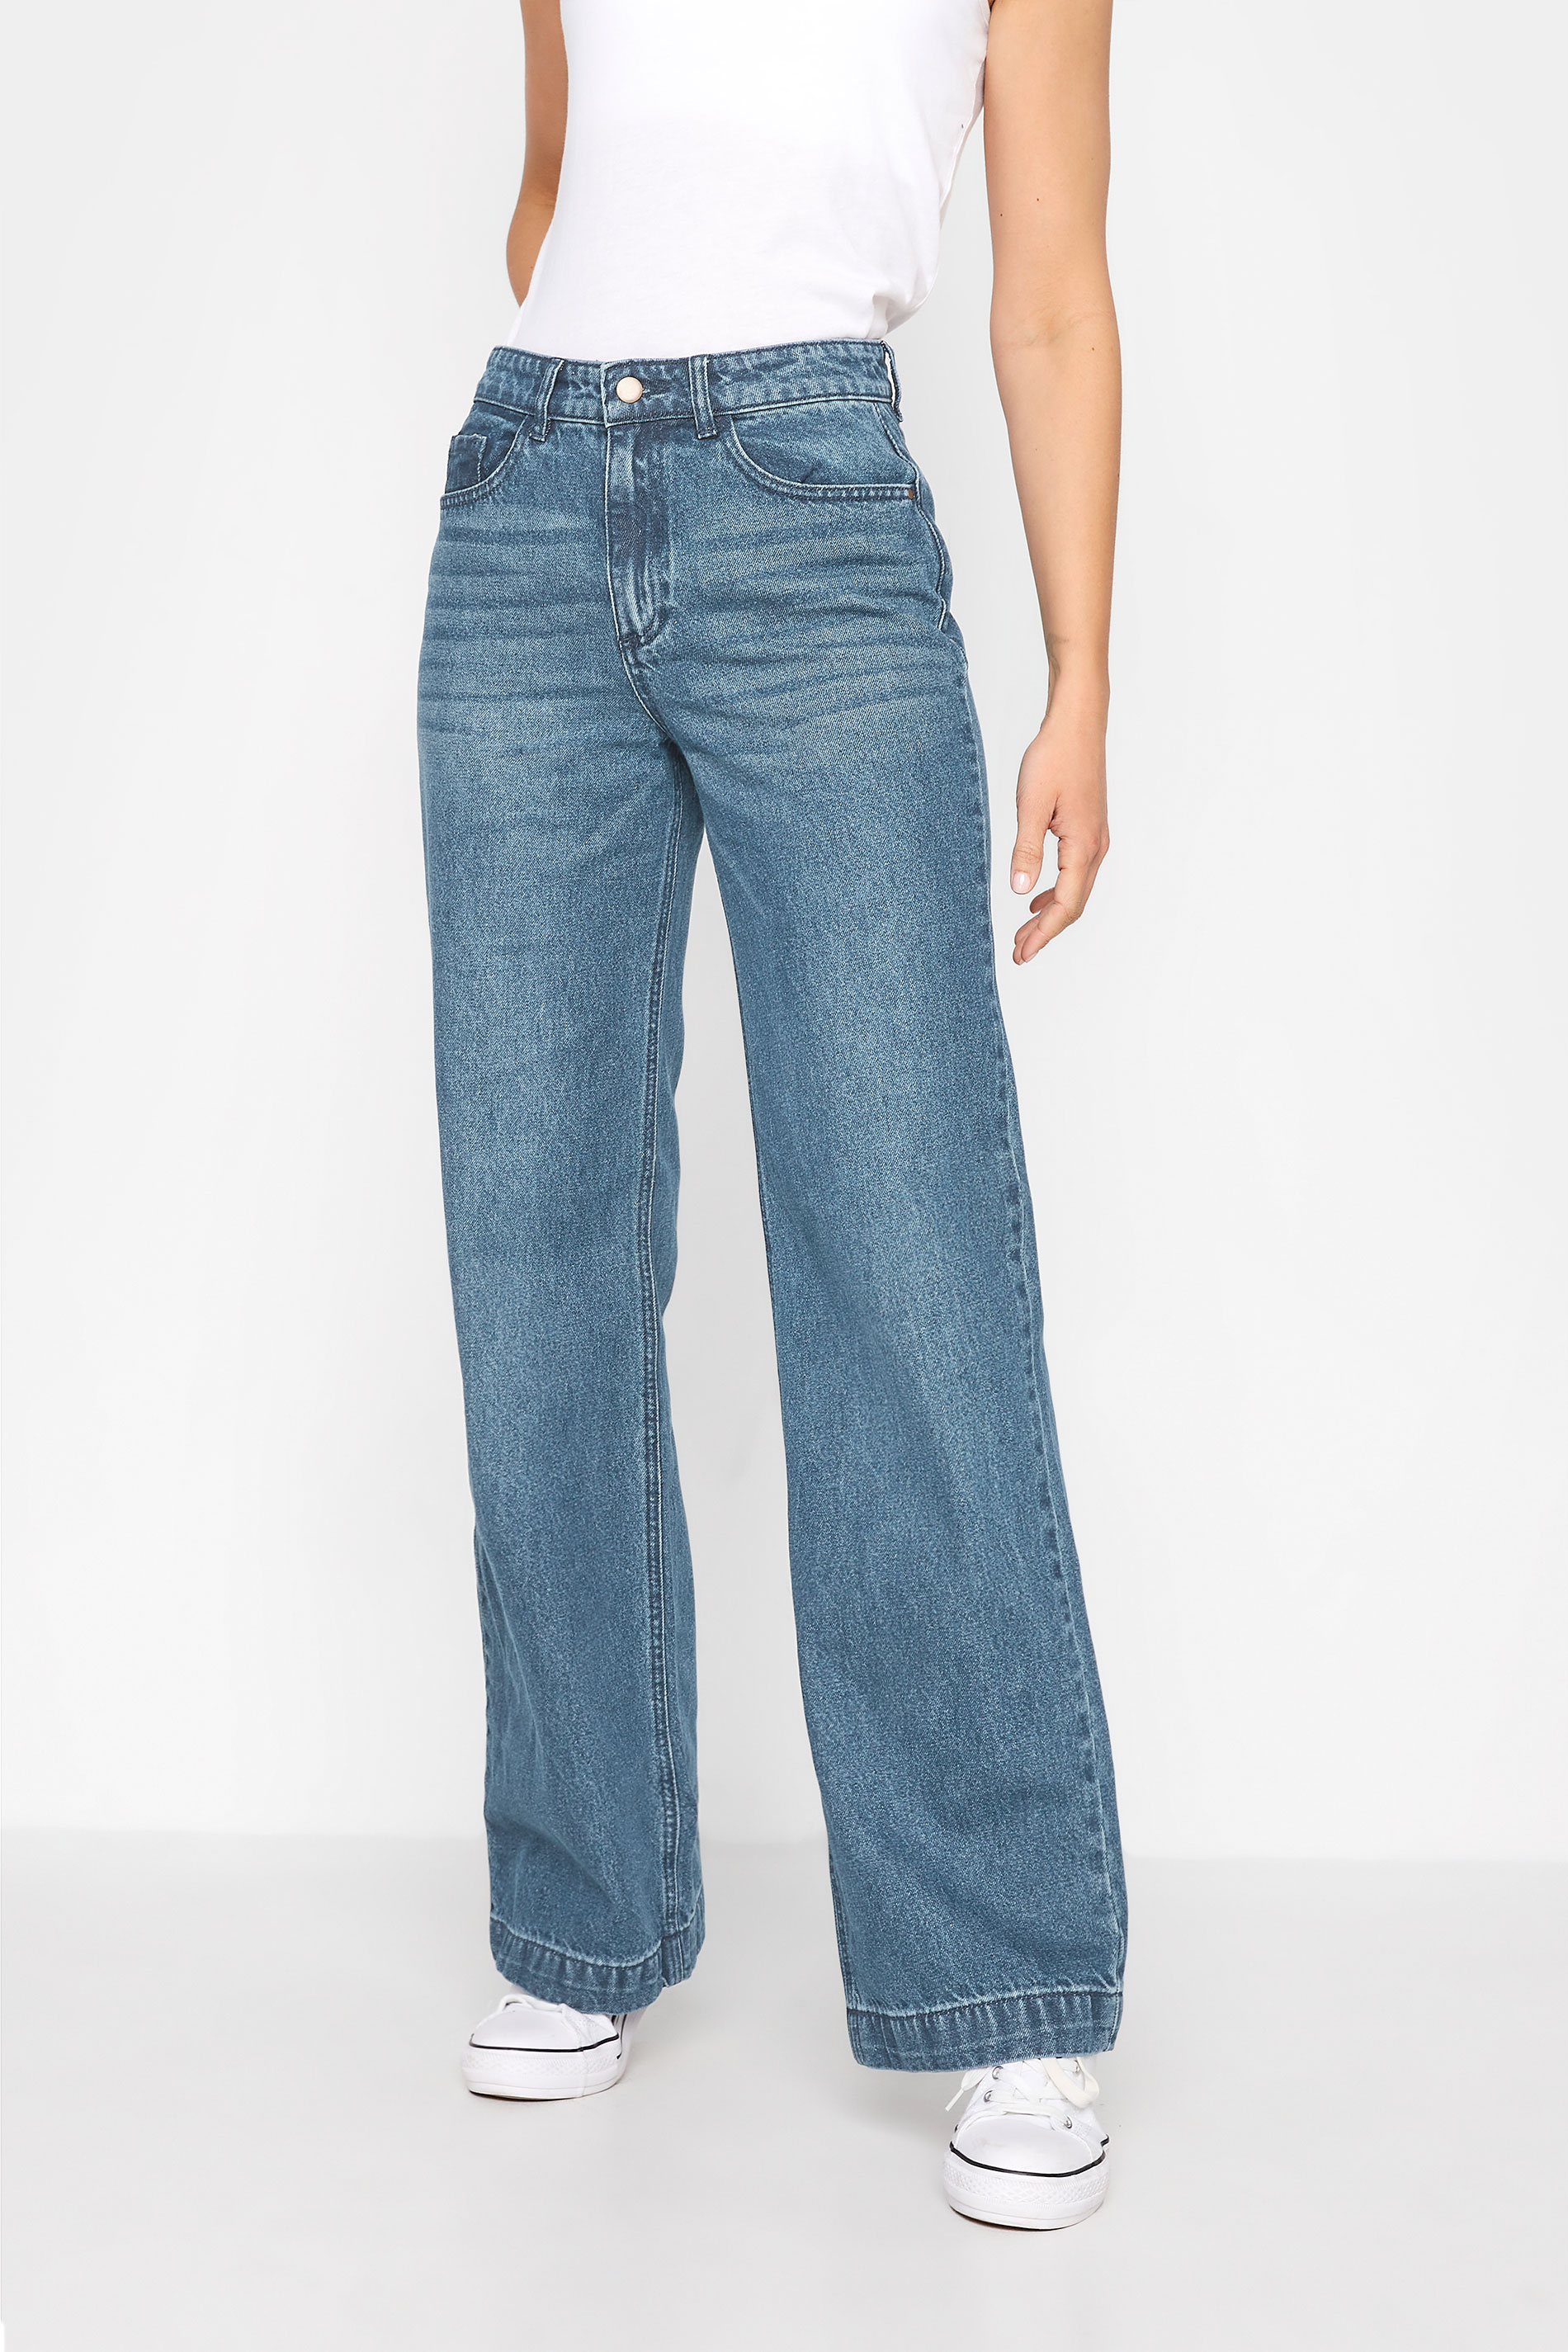 Tall Women's LTS MADE FOR GOOD Mid Blue Wide Leg Jeans | Long Tall Sally  1